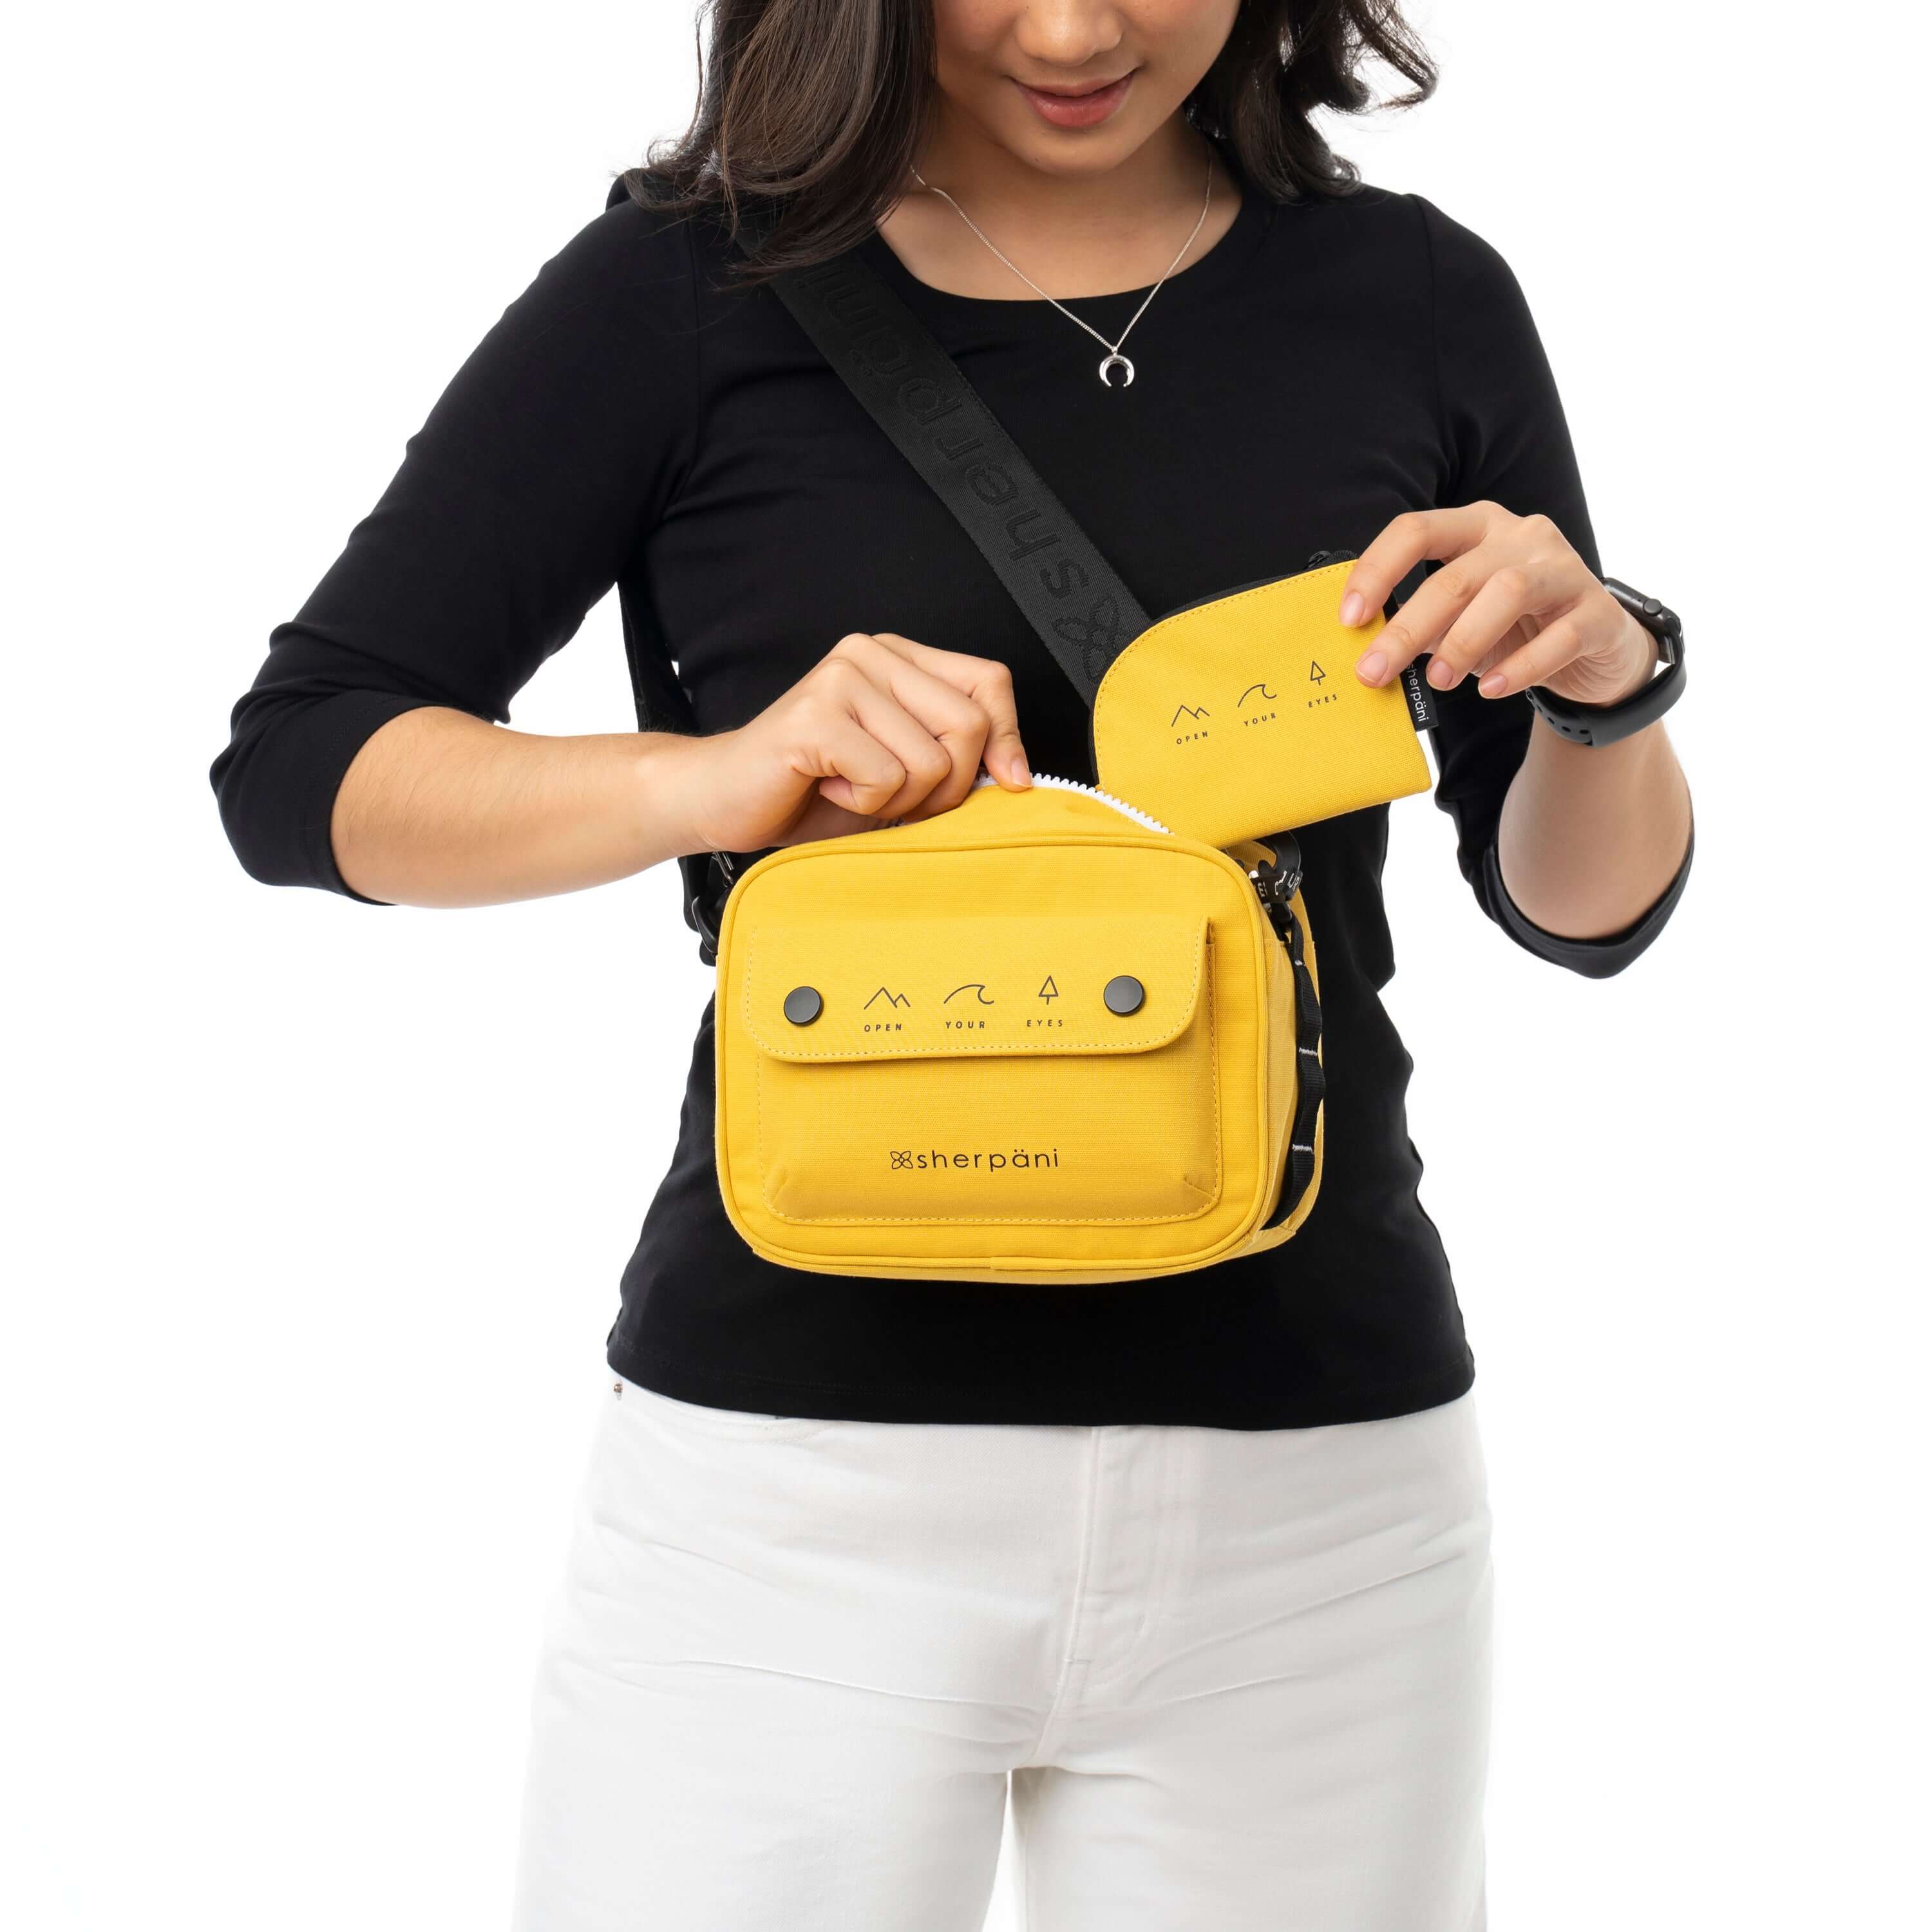 Close up view of a brown haired woman facing the camera and looking down at her bag. She is wearing a black shirt and white pants. She carries Sherpani crossbody, the Osaka in Sunflower, over her shoulder. She is pulling the detachable coin purse out of the bag.